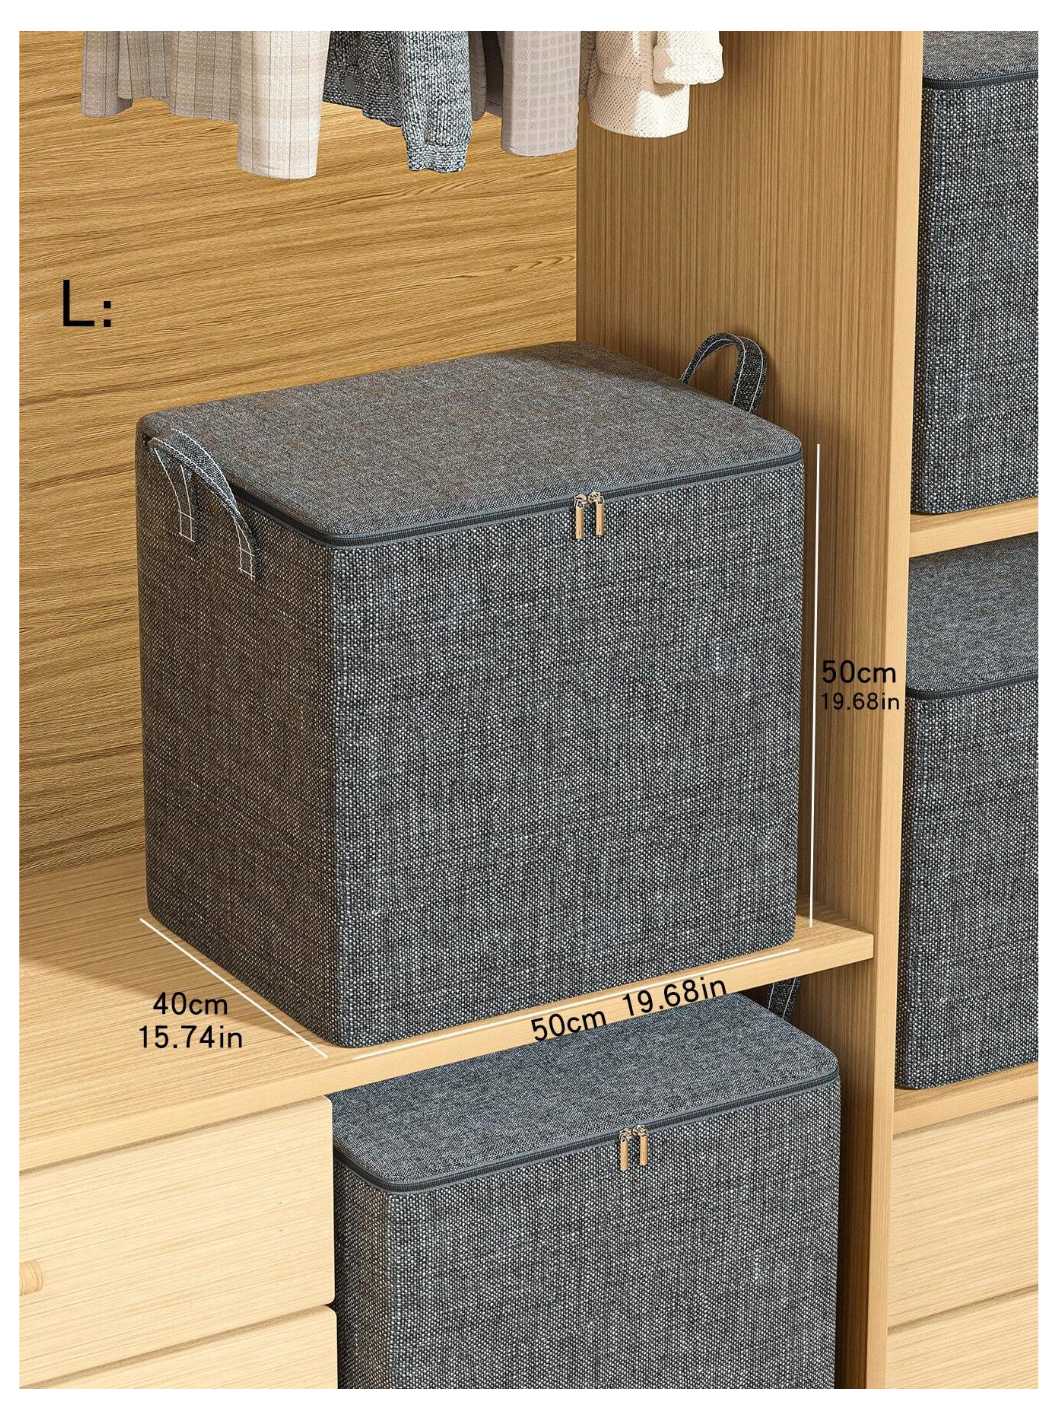 Zip, Fold, Organize: 1PC Cationic Zipper Storage Bag – Your Stylish Solution for Home Storage and Organization!